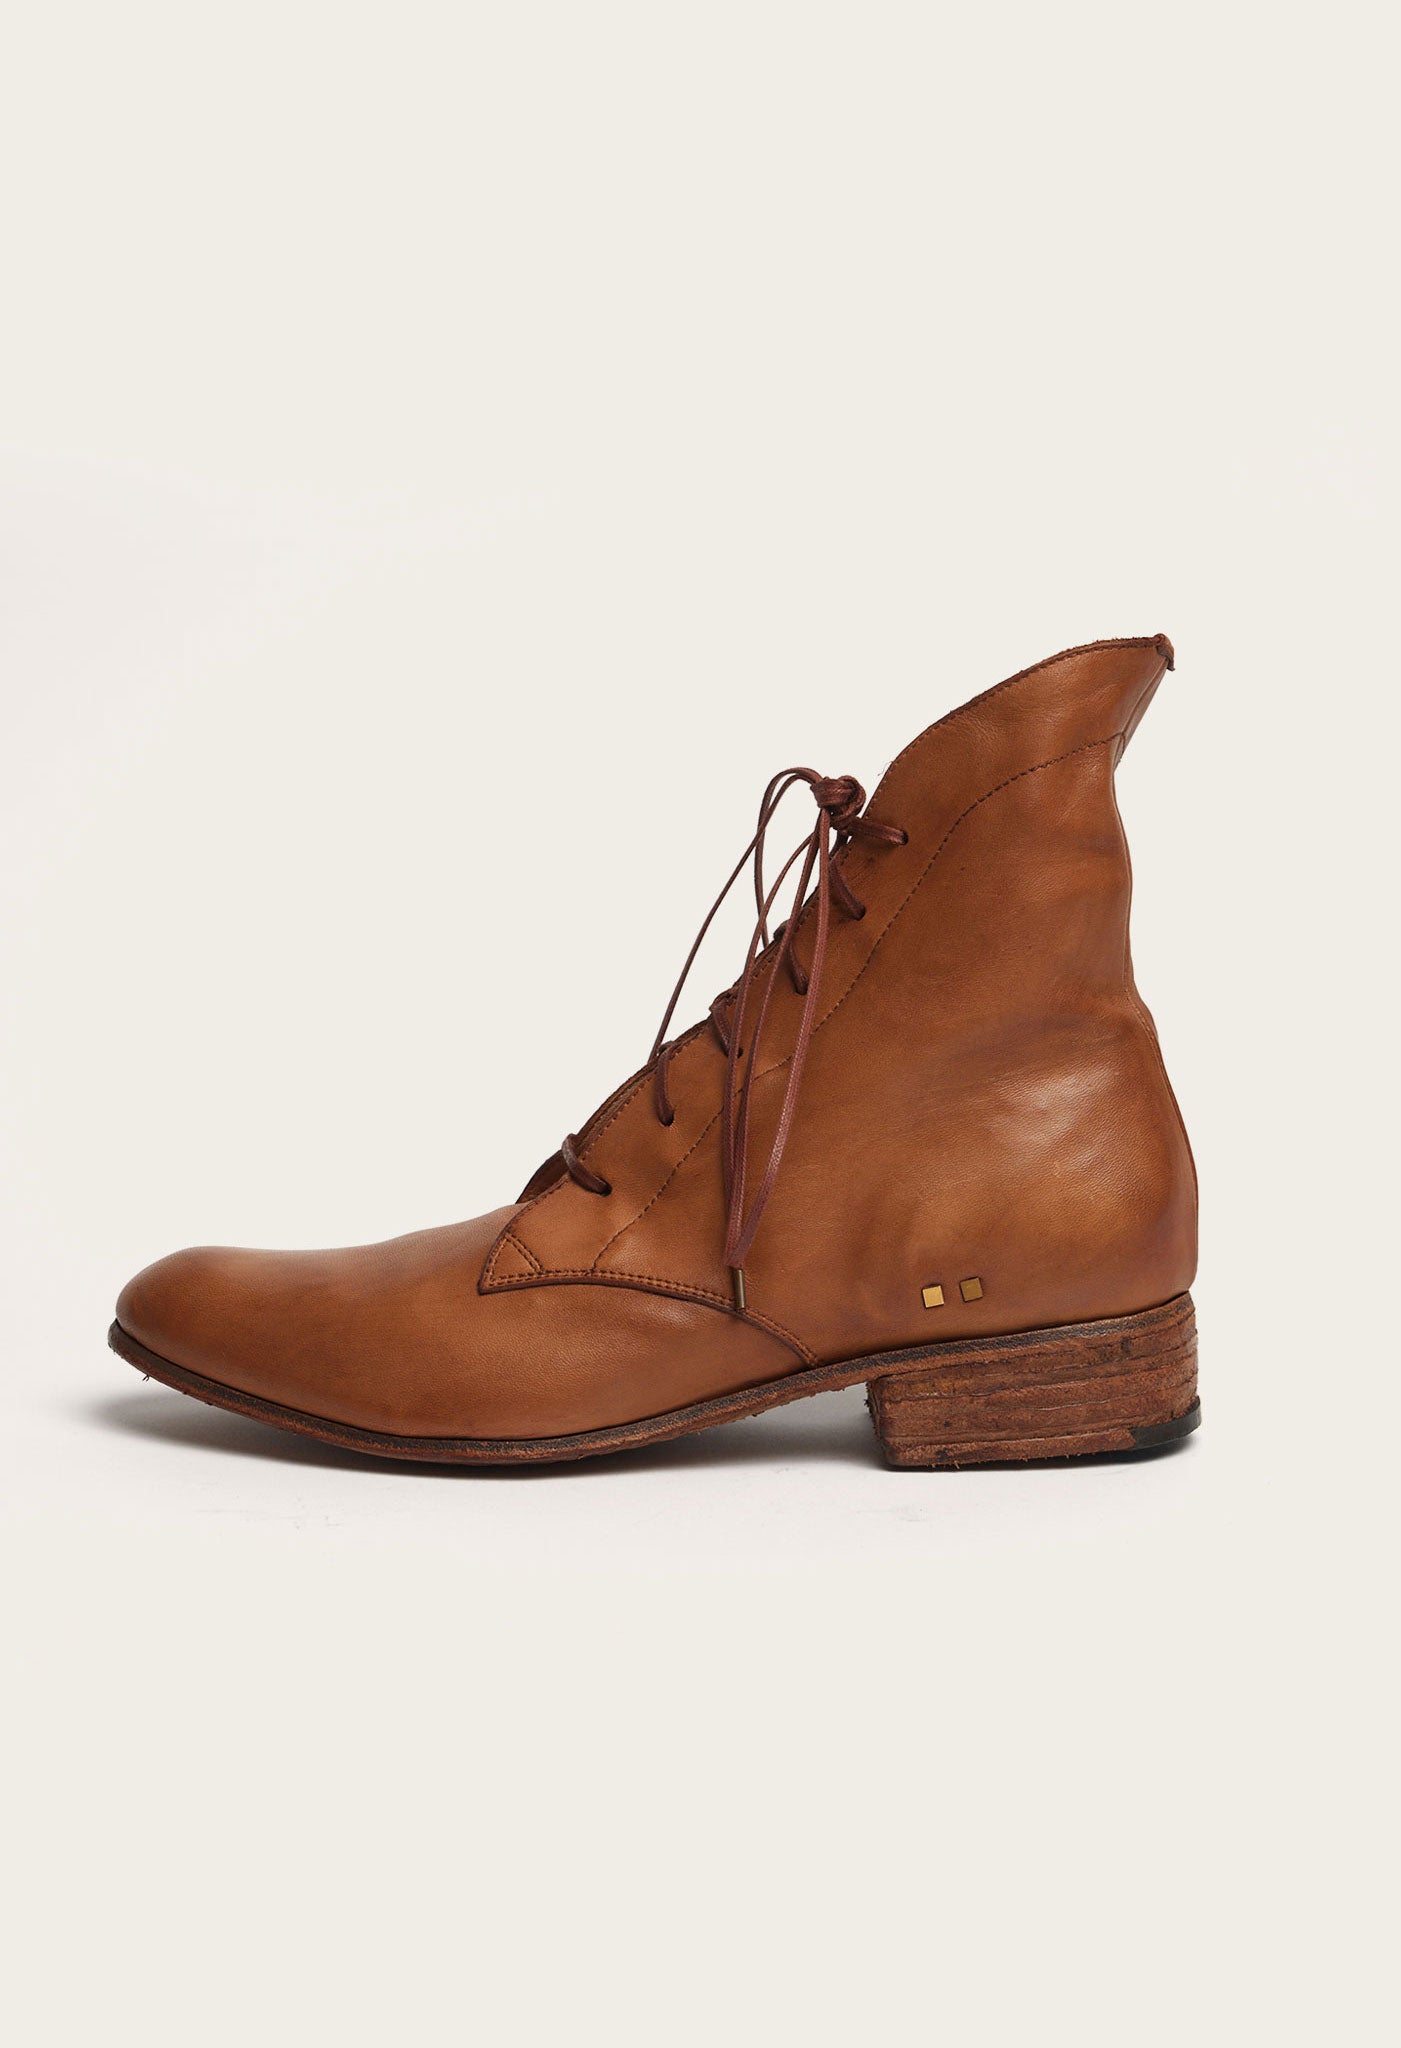 The Women's Mansfield: Tobacco Leather